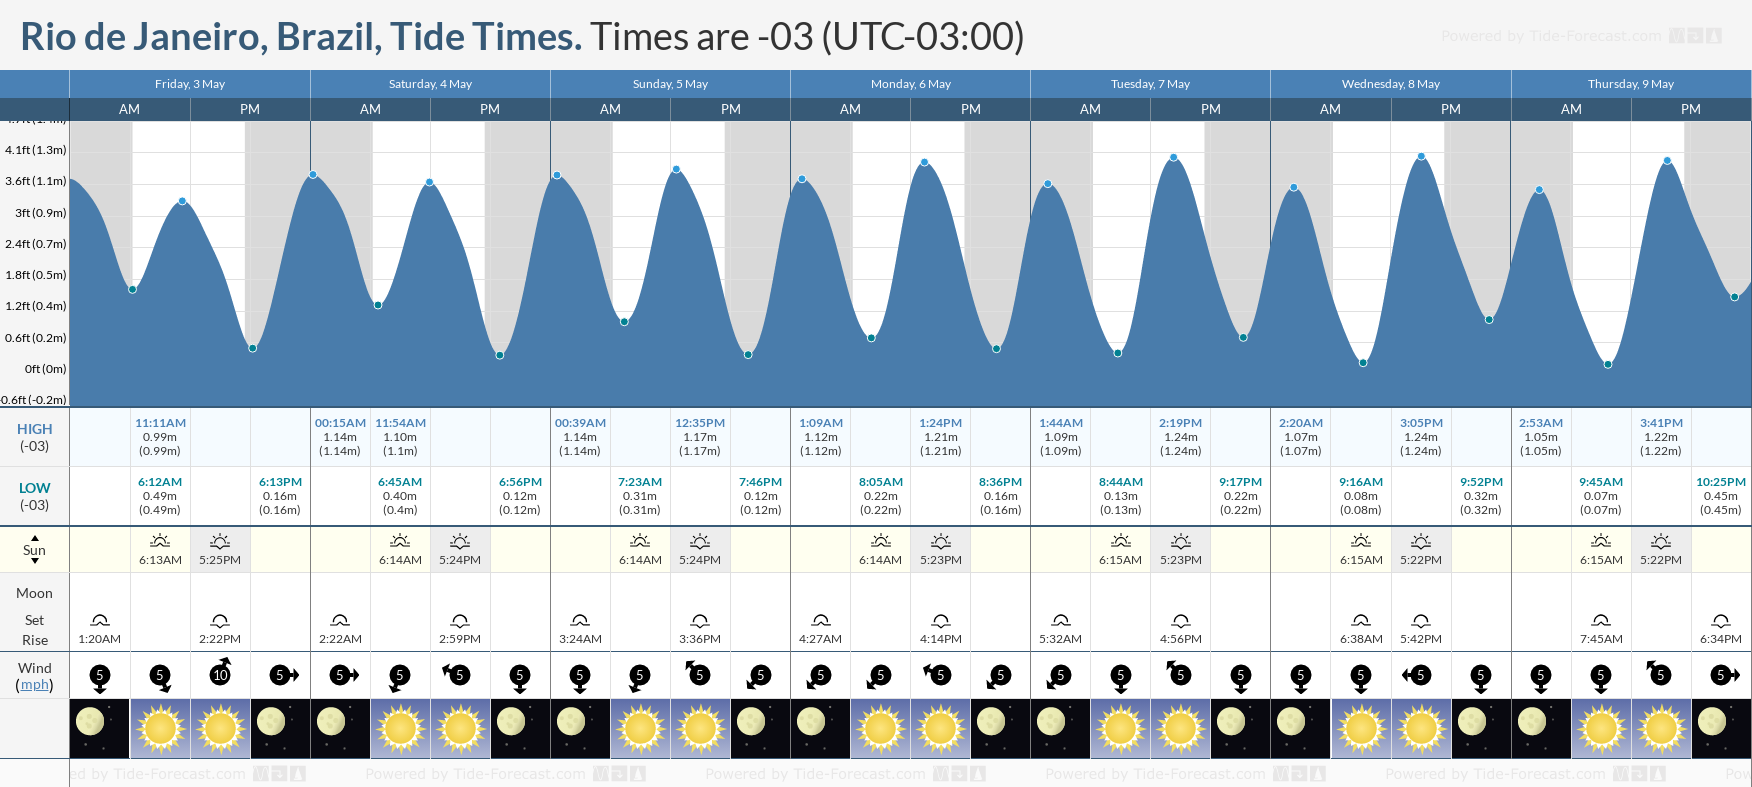 Rio de Janeiro, Brazil Tide Chart including high and low tide tide times for the next 7 days